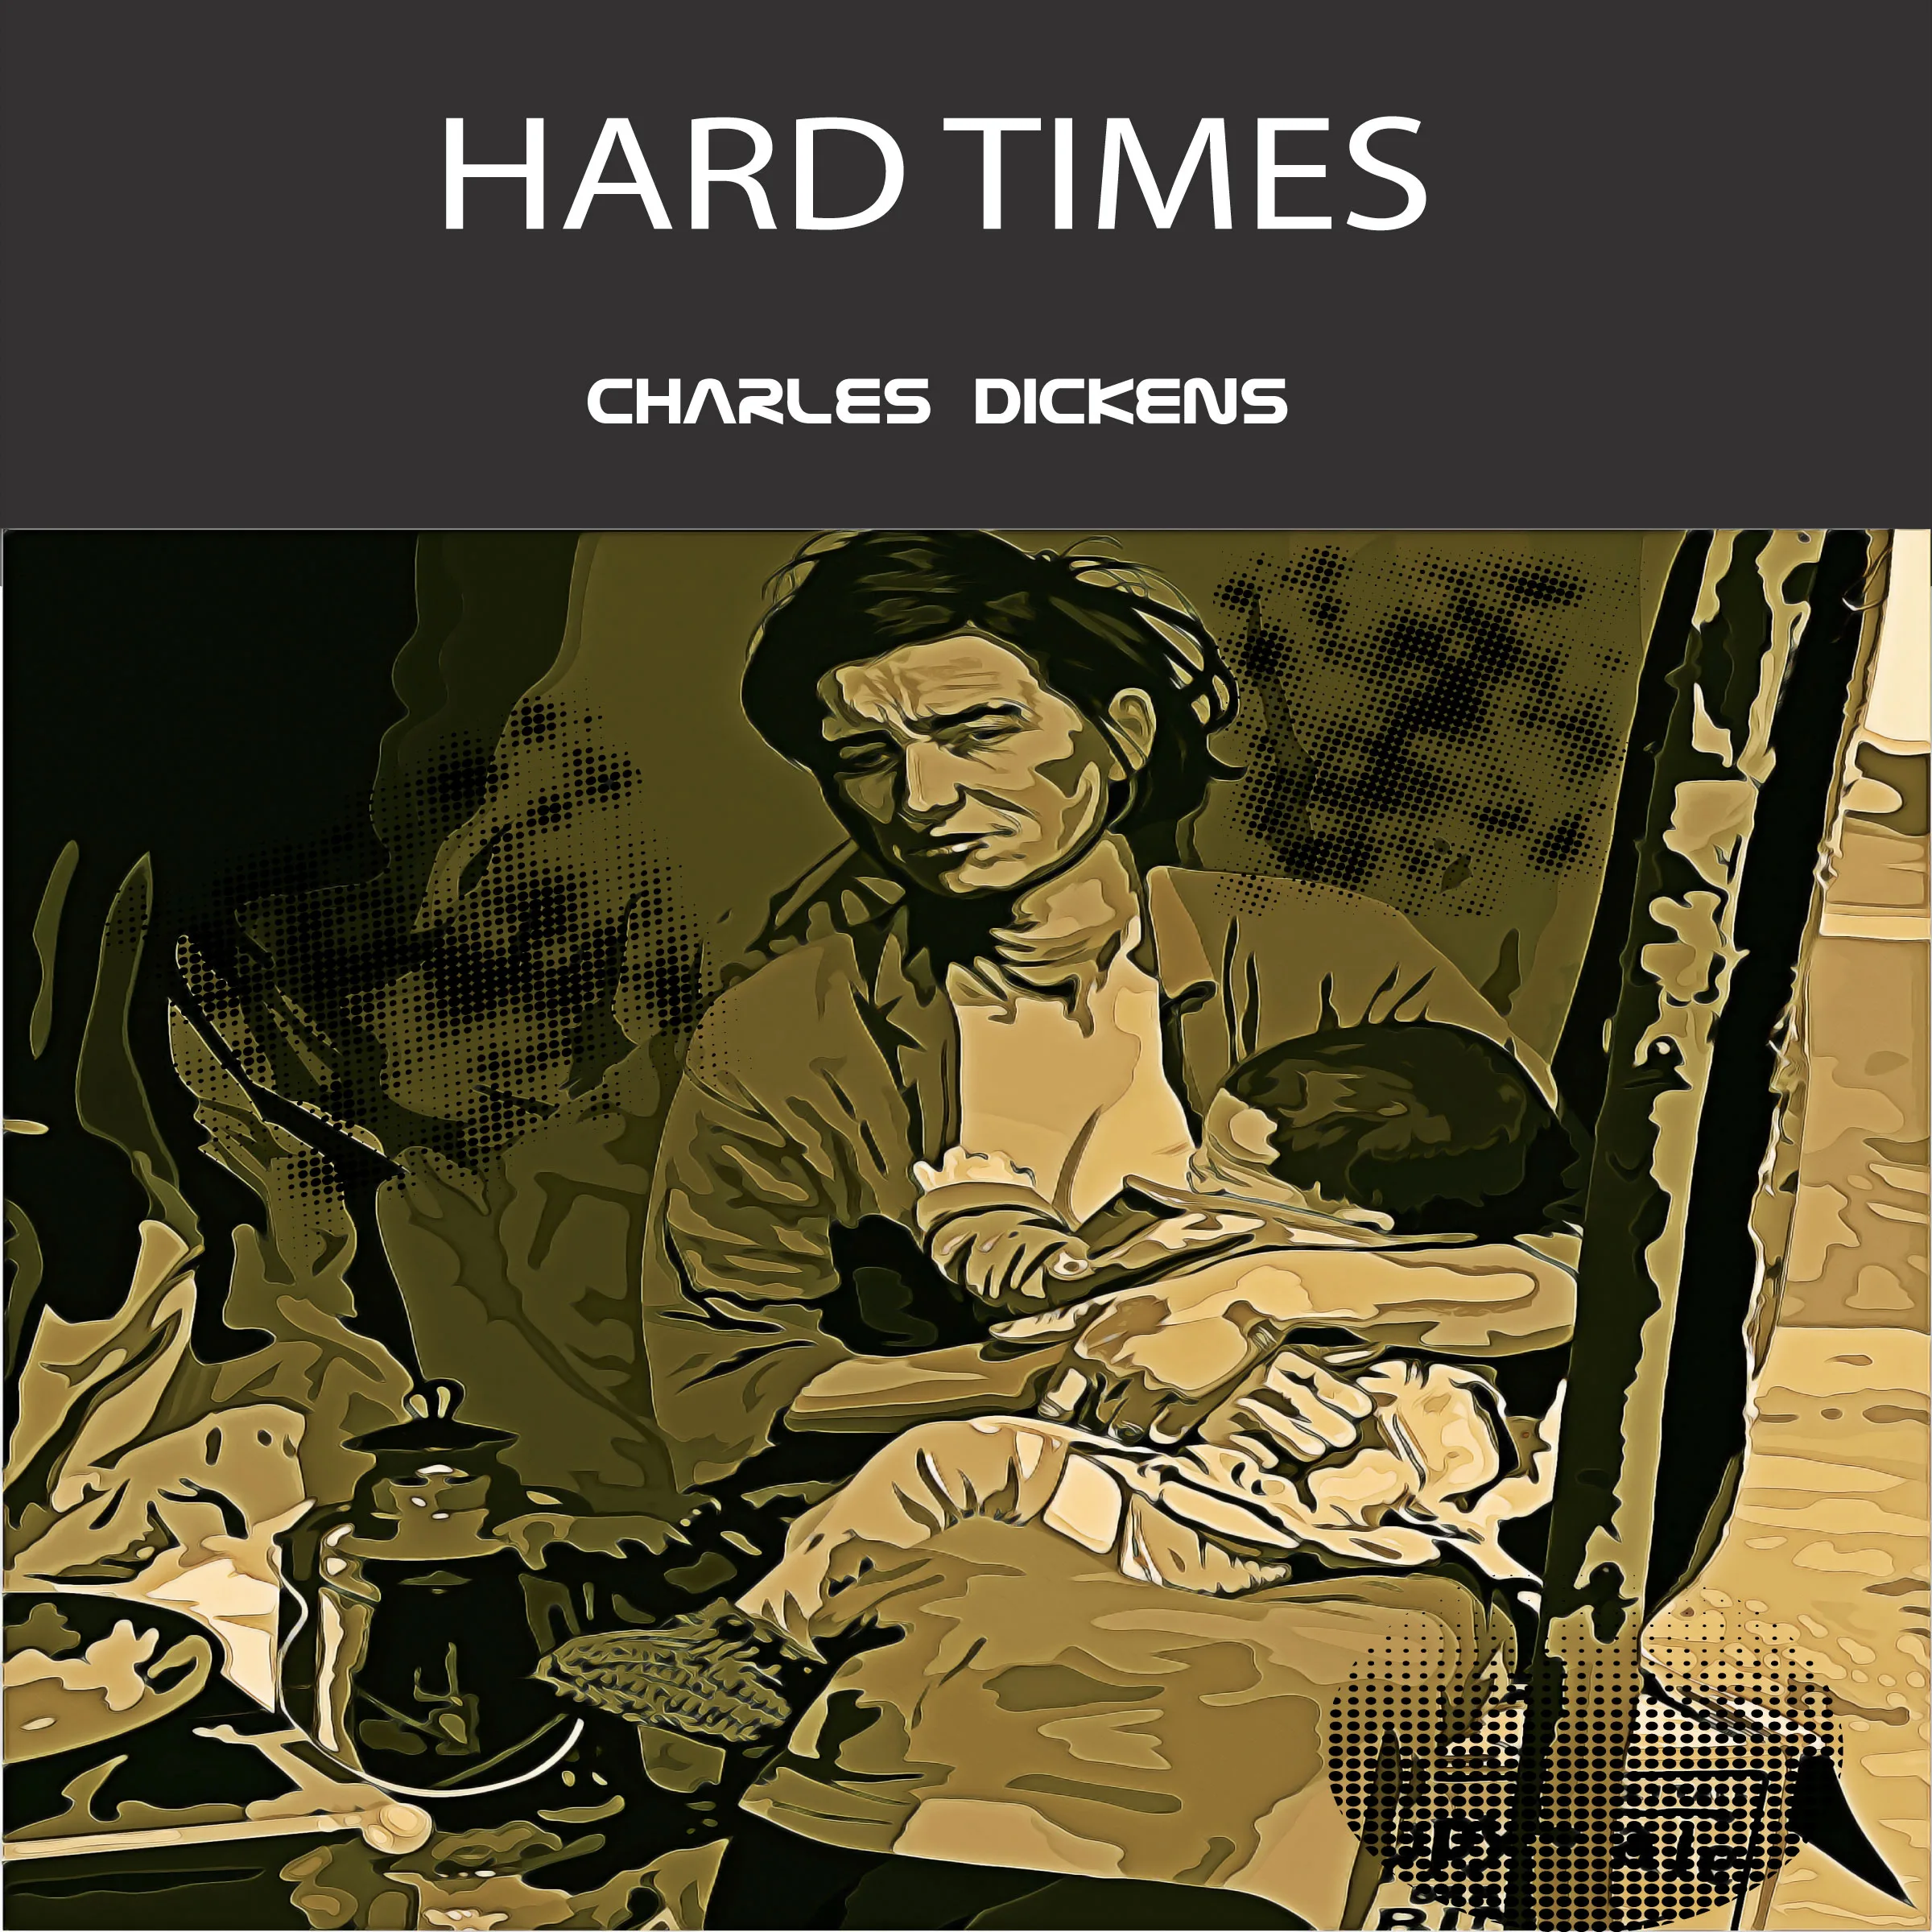 Hard Times By Charles Dickens, the audiobook version